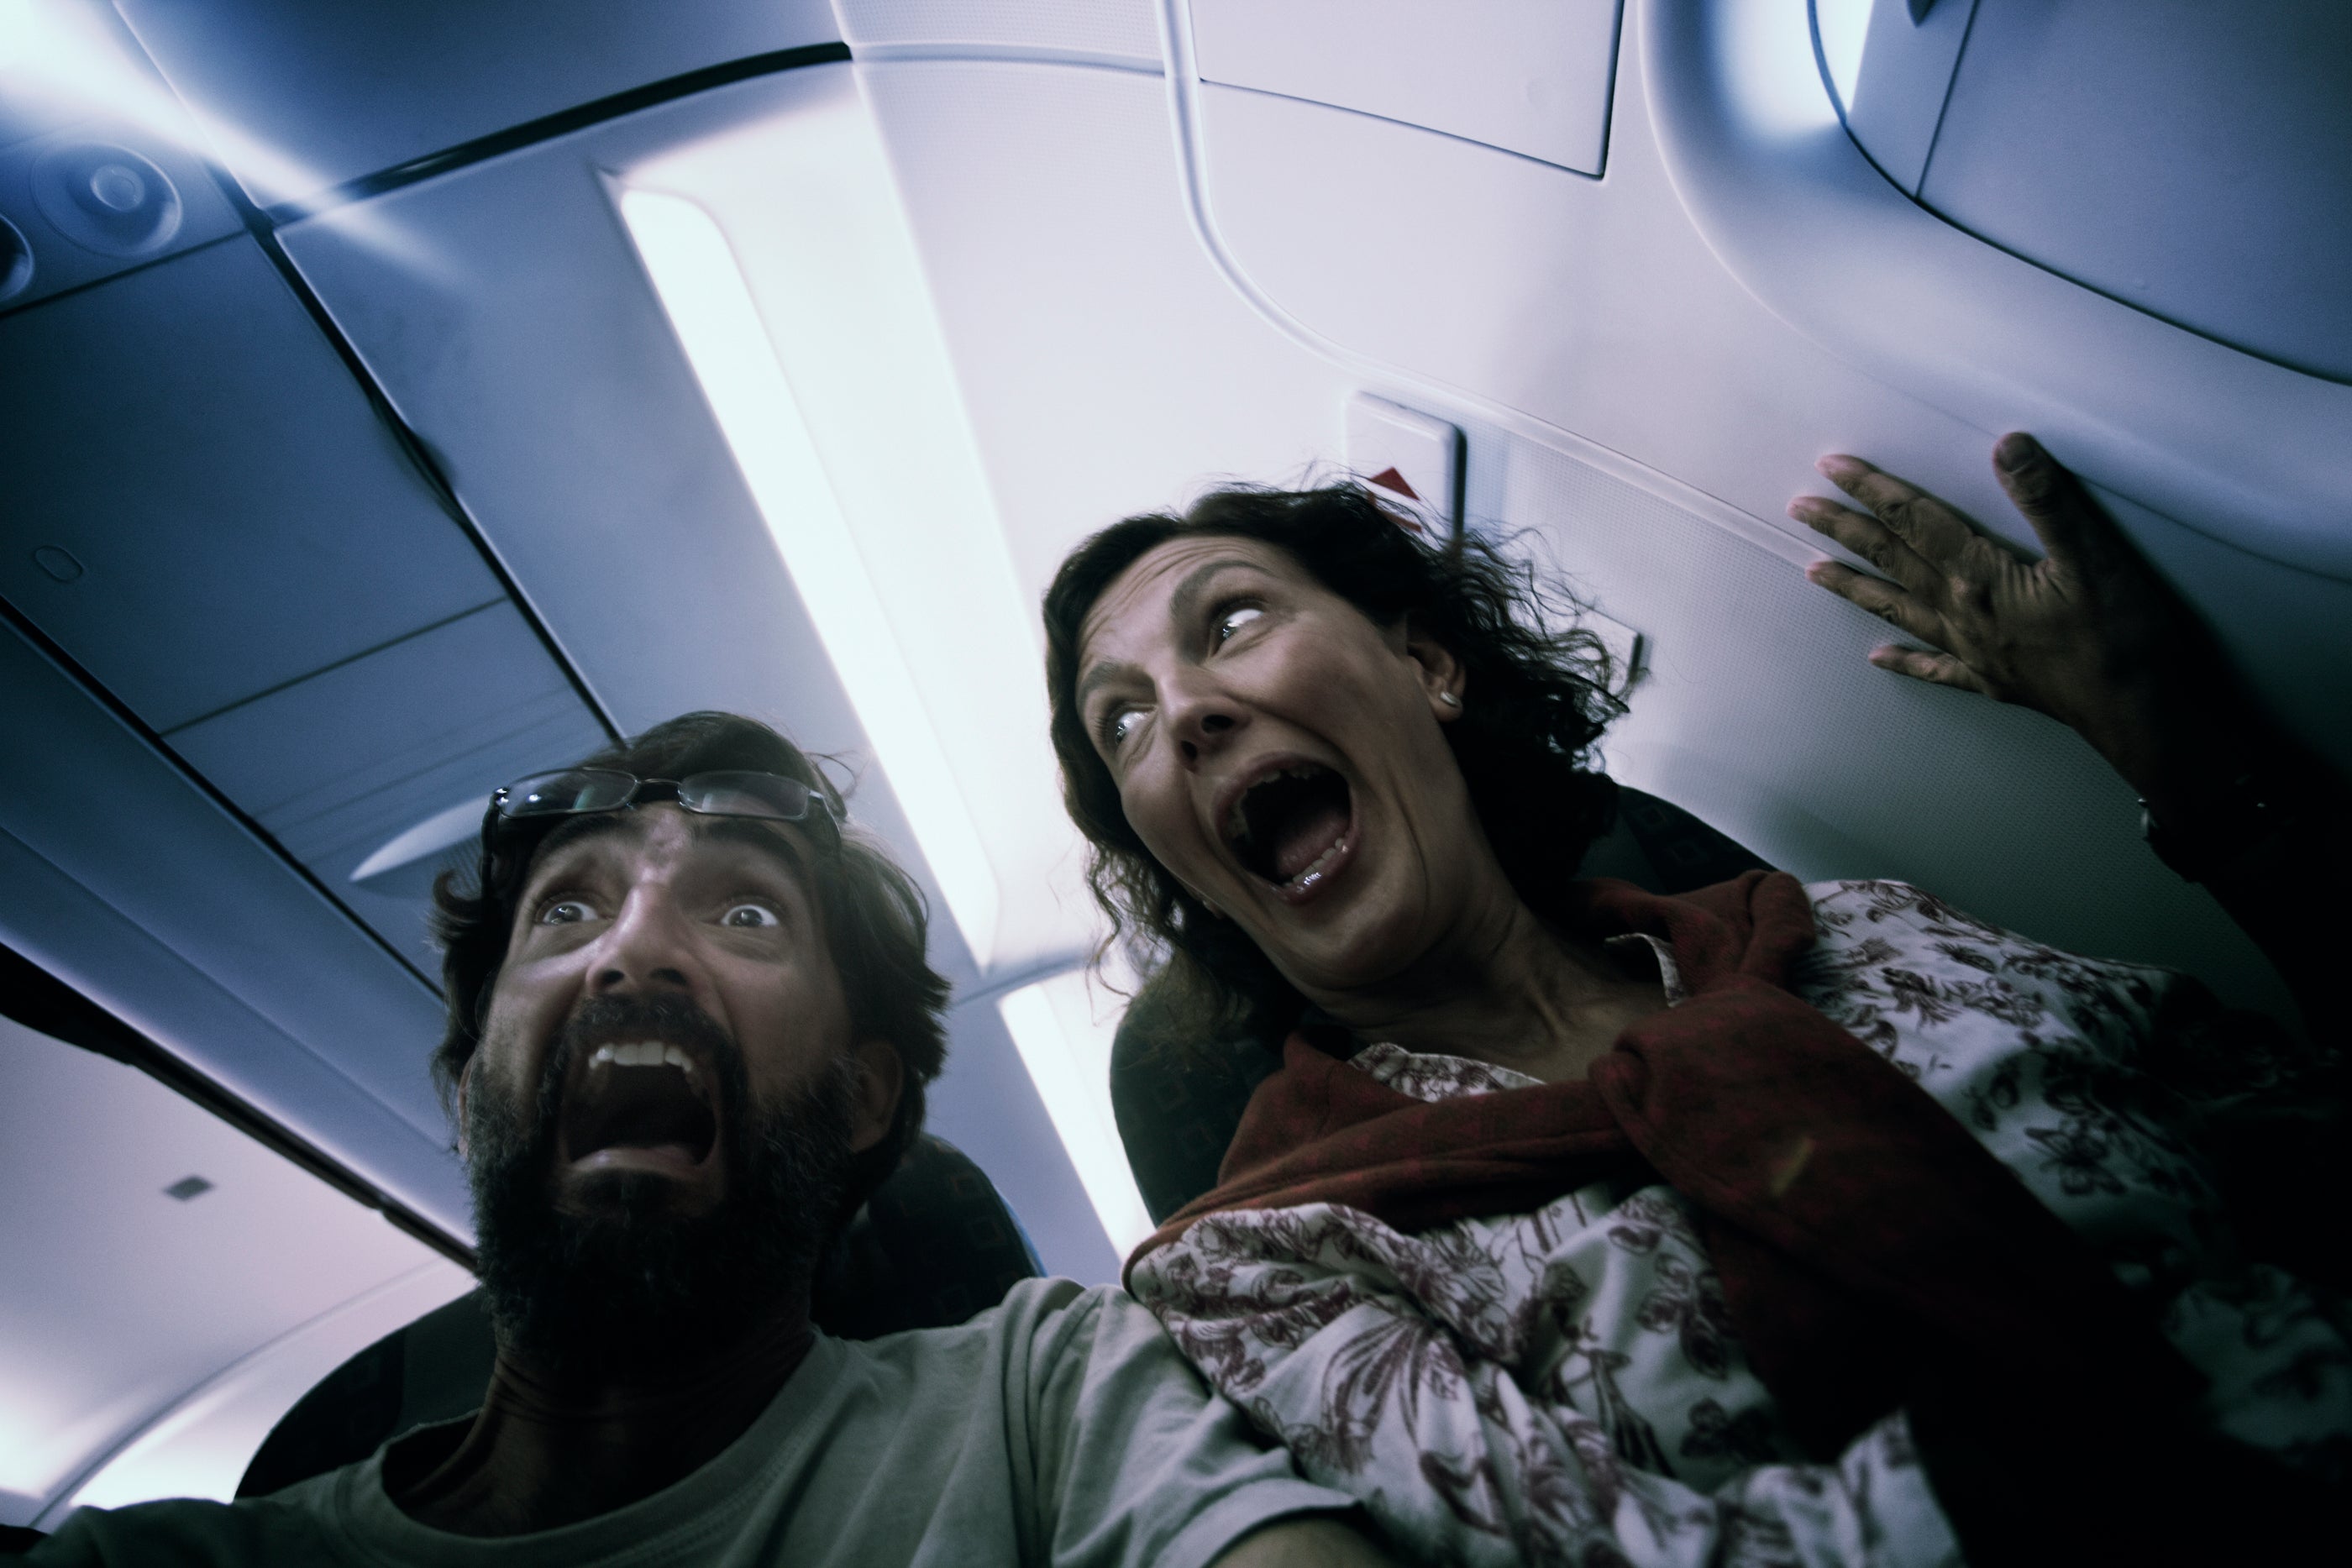 Middle aged couple in terror on a plane.